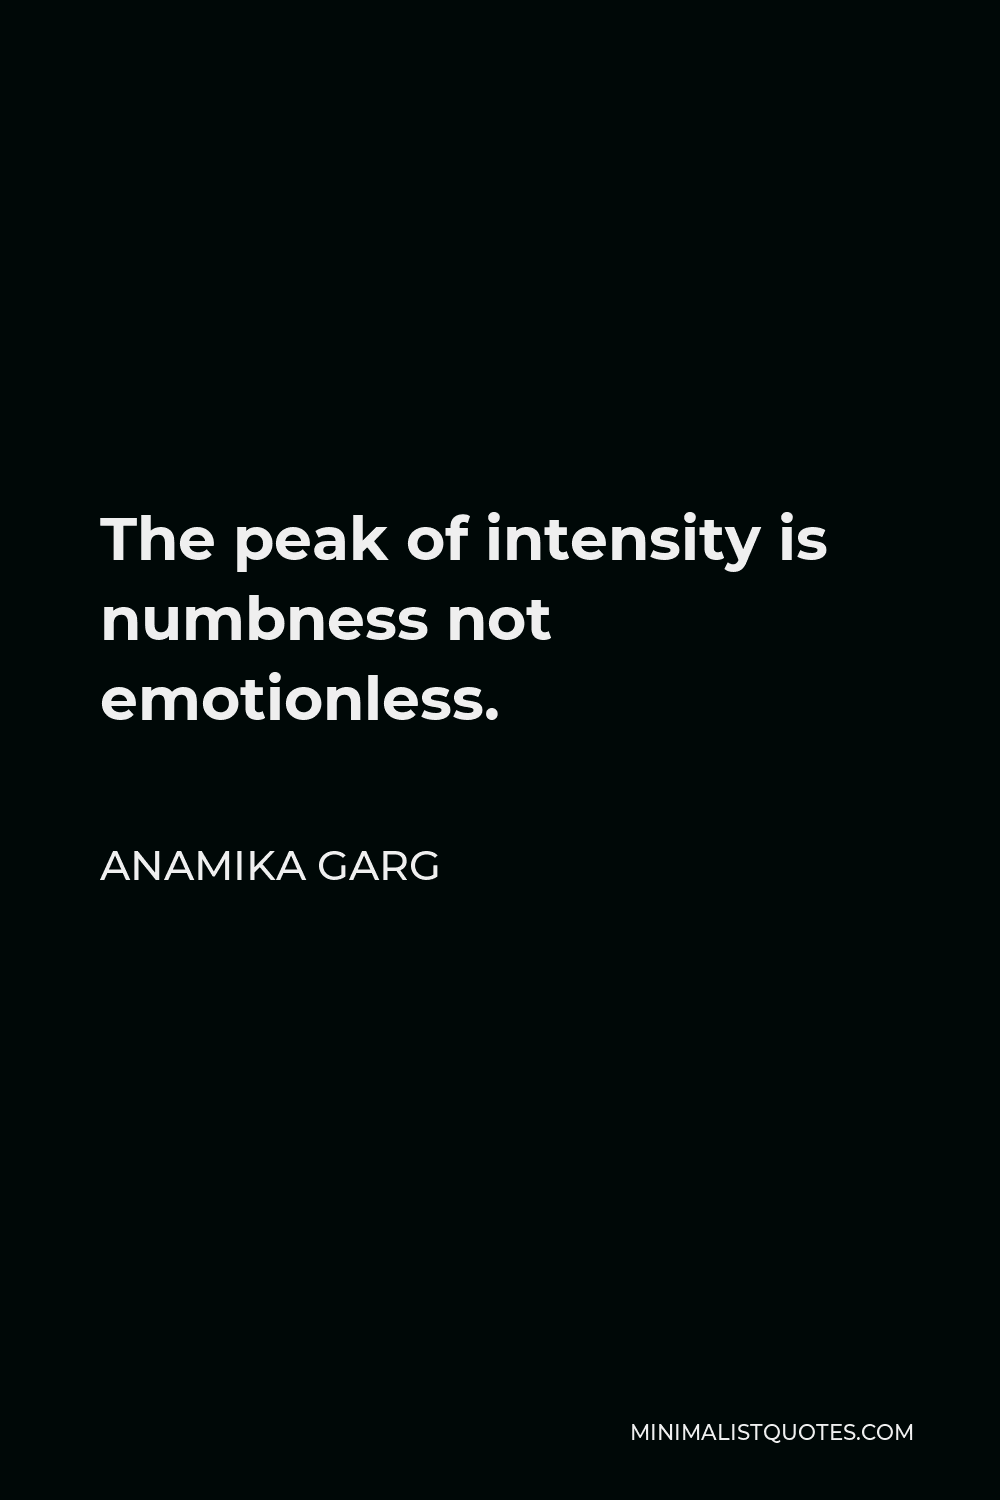 Anamika Garg Quote - The peak of intensity is numbness not emotionless.